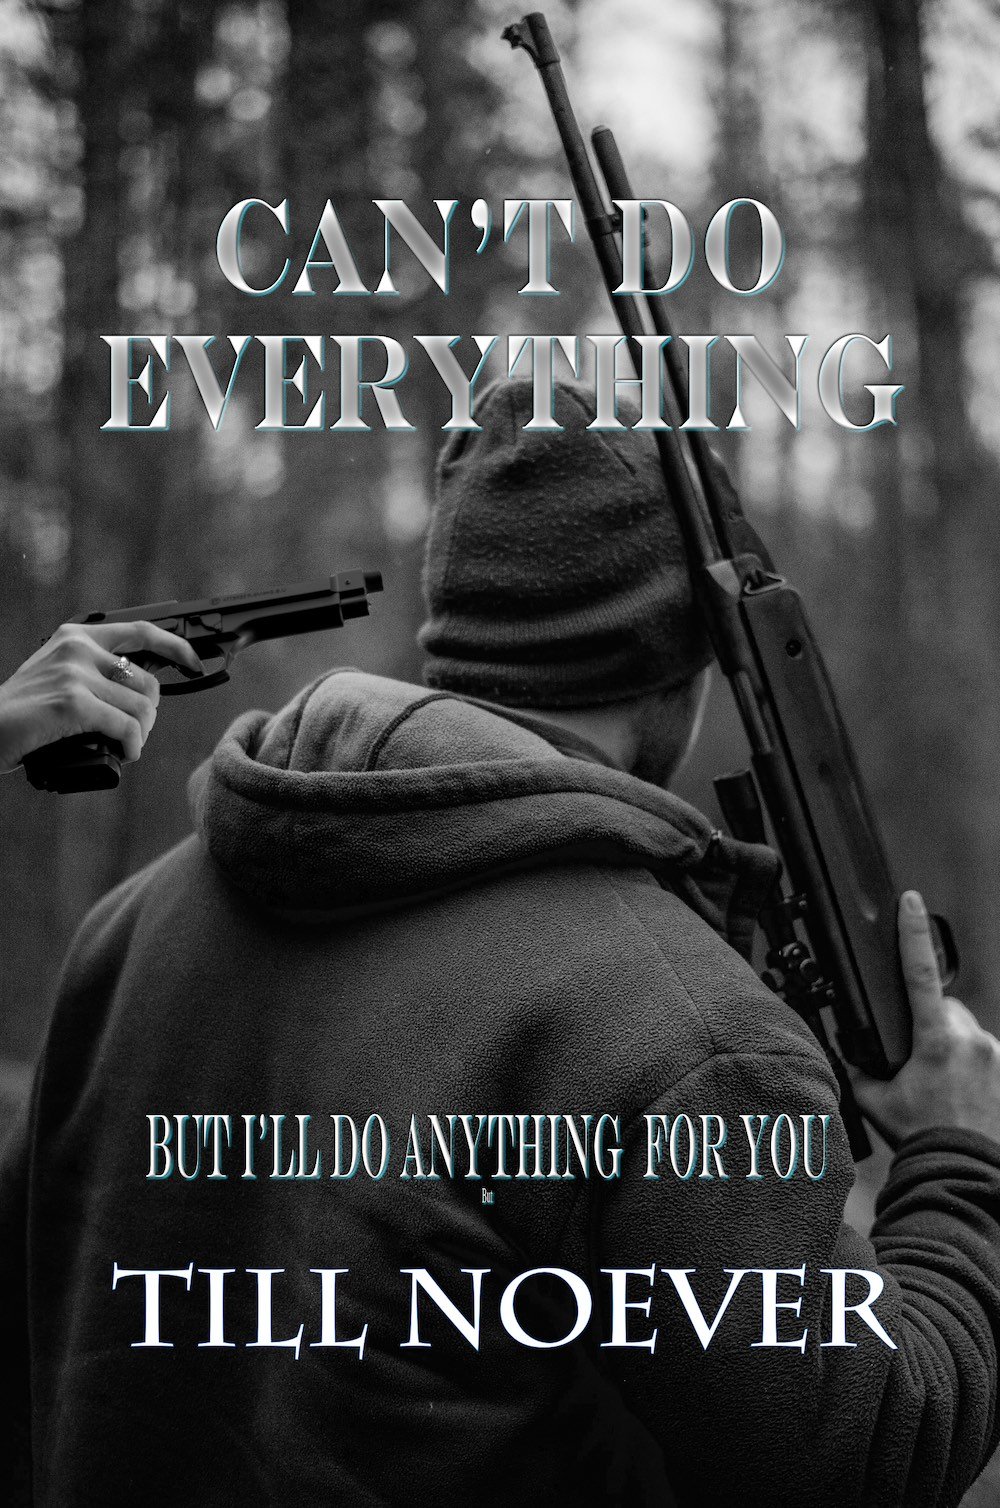 Can't Do Everything KINDLECover-Amazon v3.4 mq.jpeg